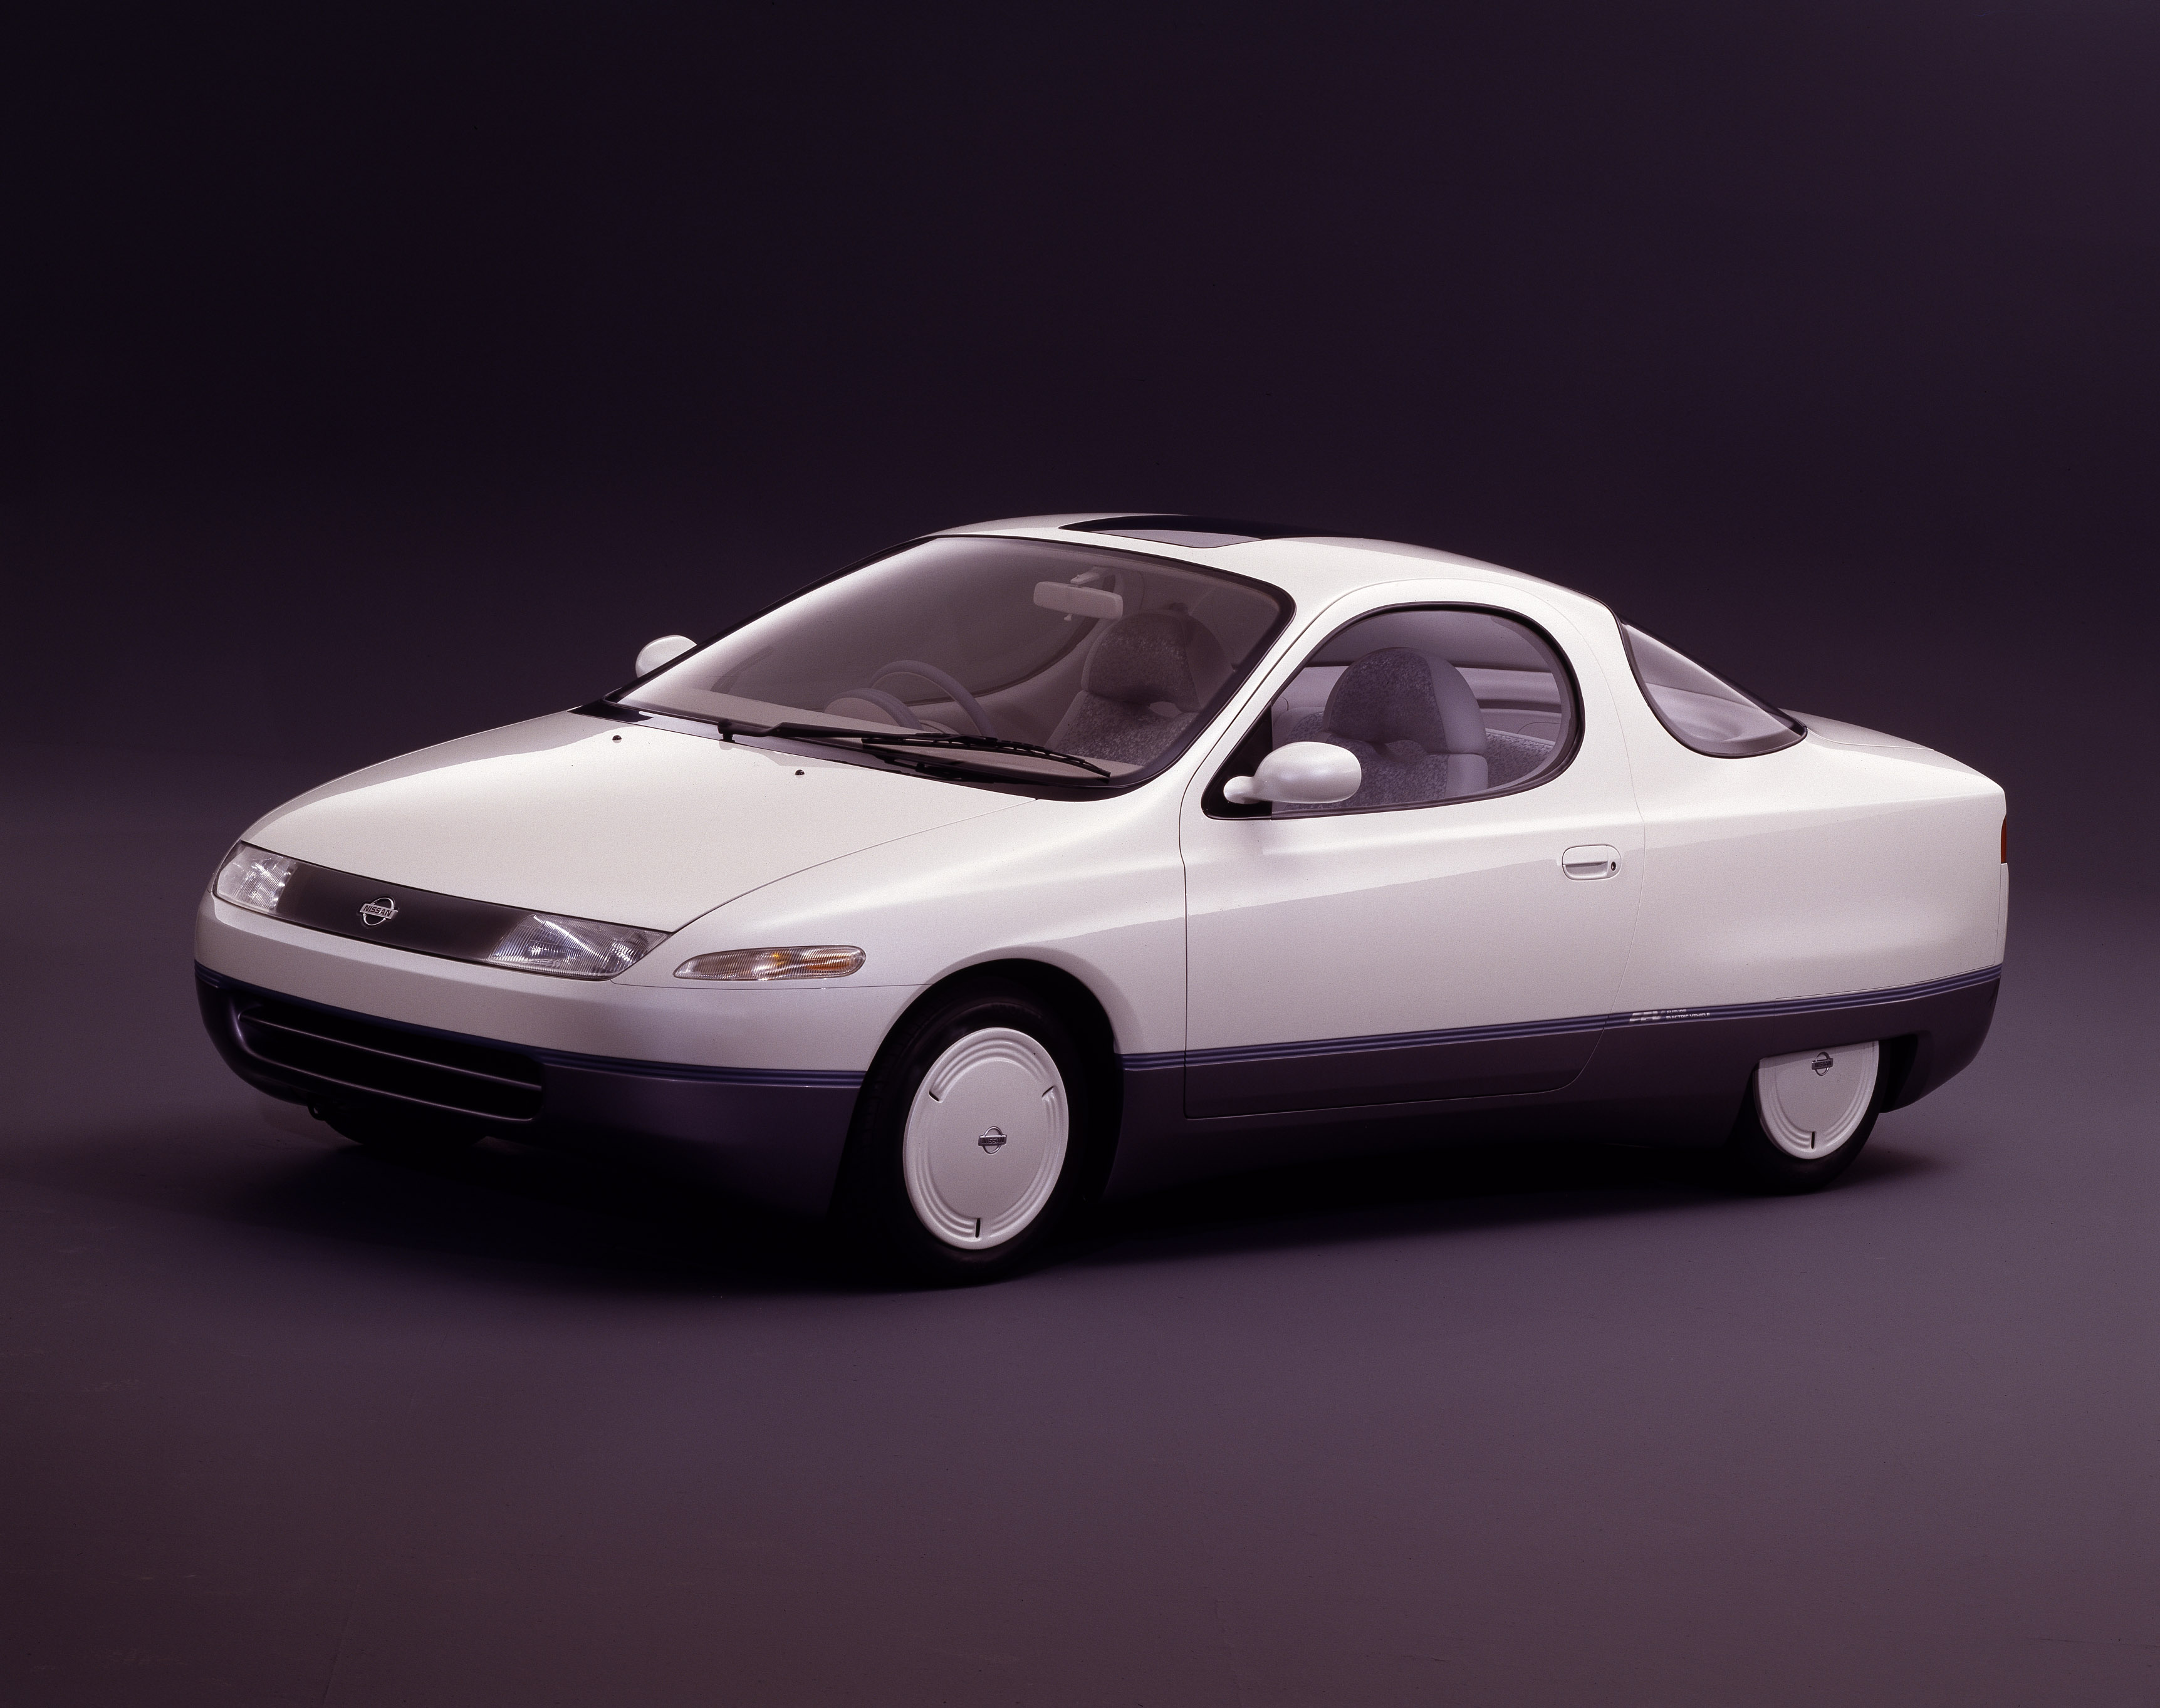 Long before Tesla or the Leaf, this Nissan electric car claimed a 155-mile range